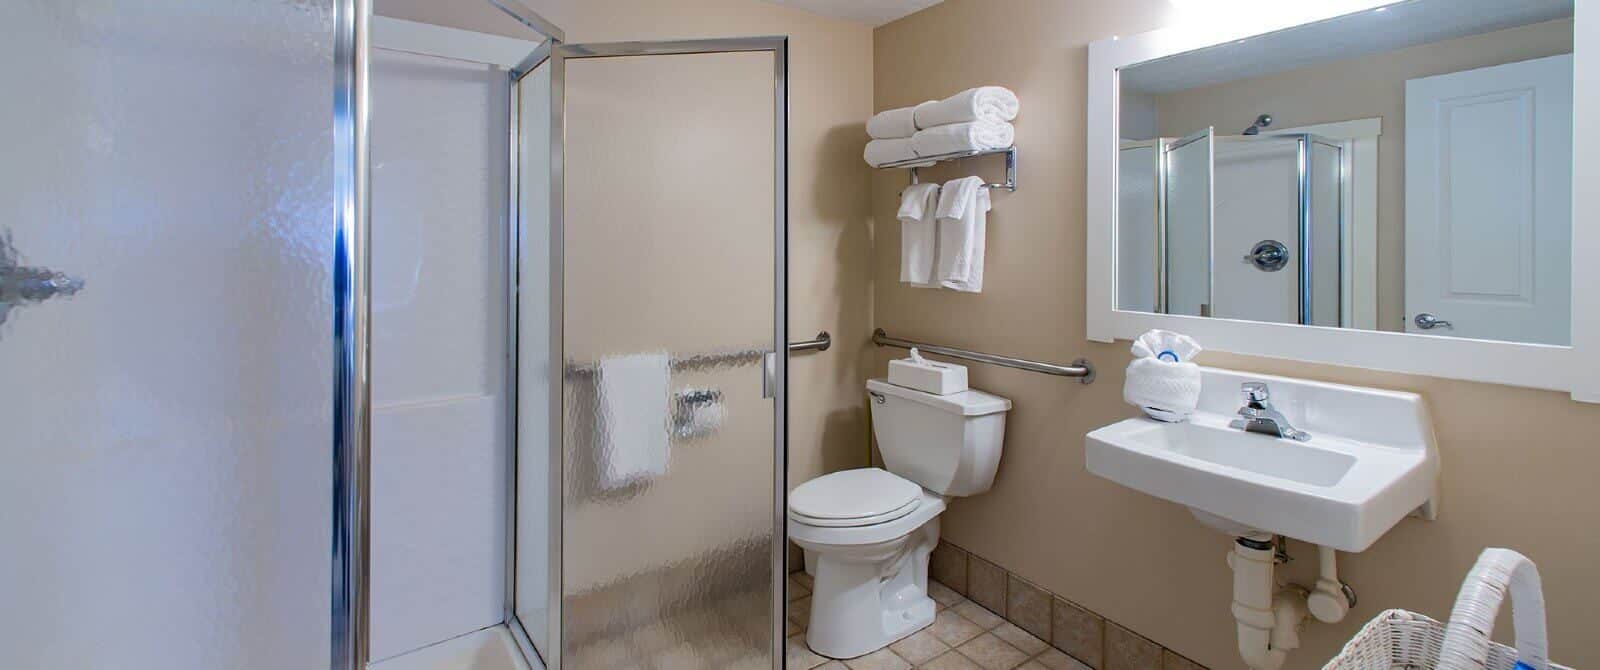 Bathroom with single sink, large framed mirror, toilet, plush white towels and stand up shower with glass doors